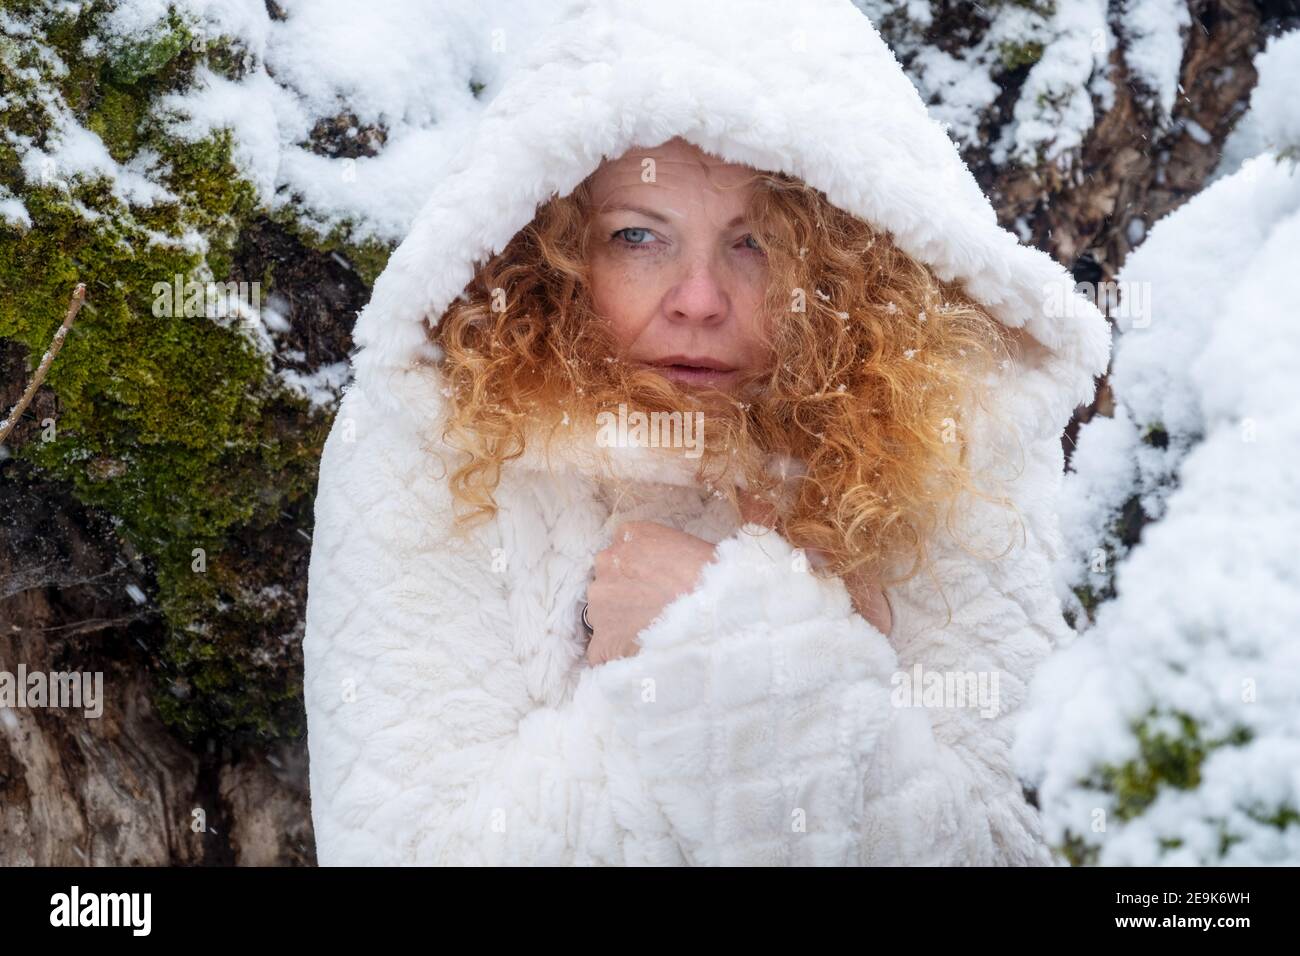 Portrait of redhead mature woman in her fifties with red curly hair with white hooded coat freezes in the snowy winter landscape Stock Photo